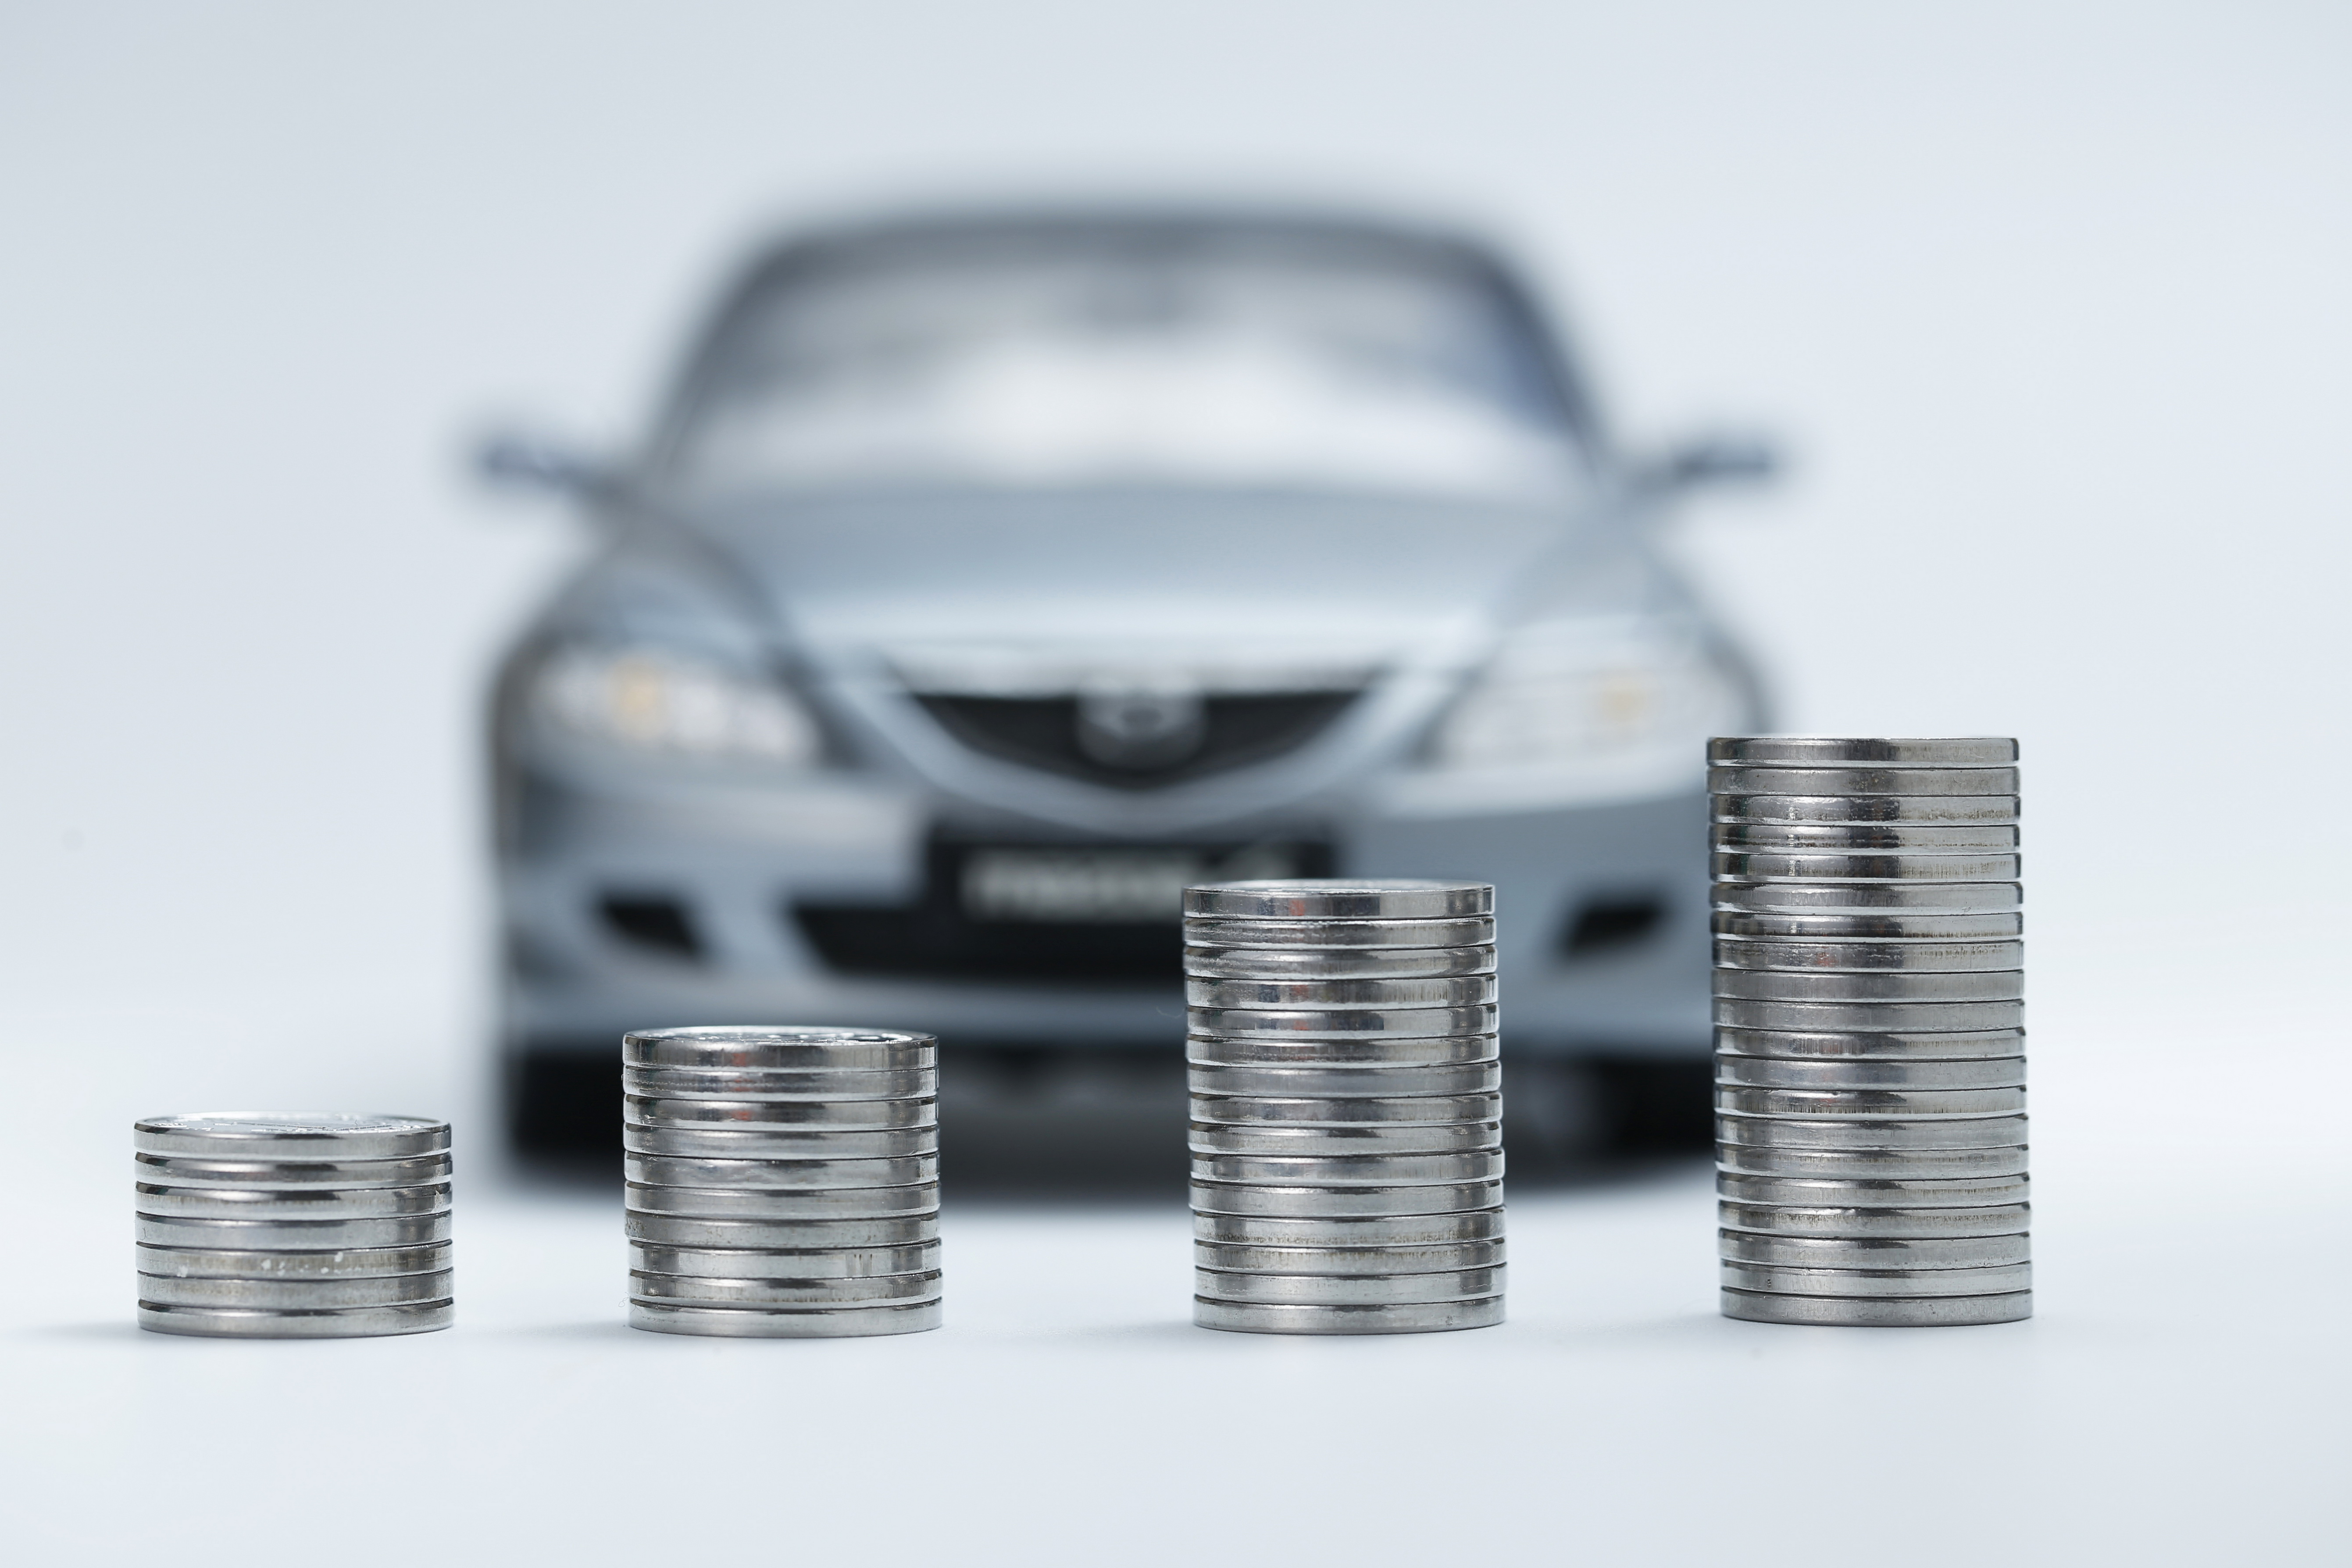 Coins stacked in front of a car. Car loans provided by IndoStar Capital Finance